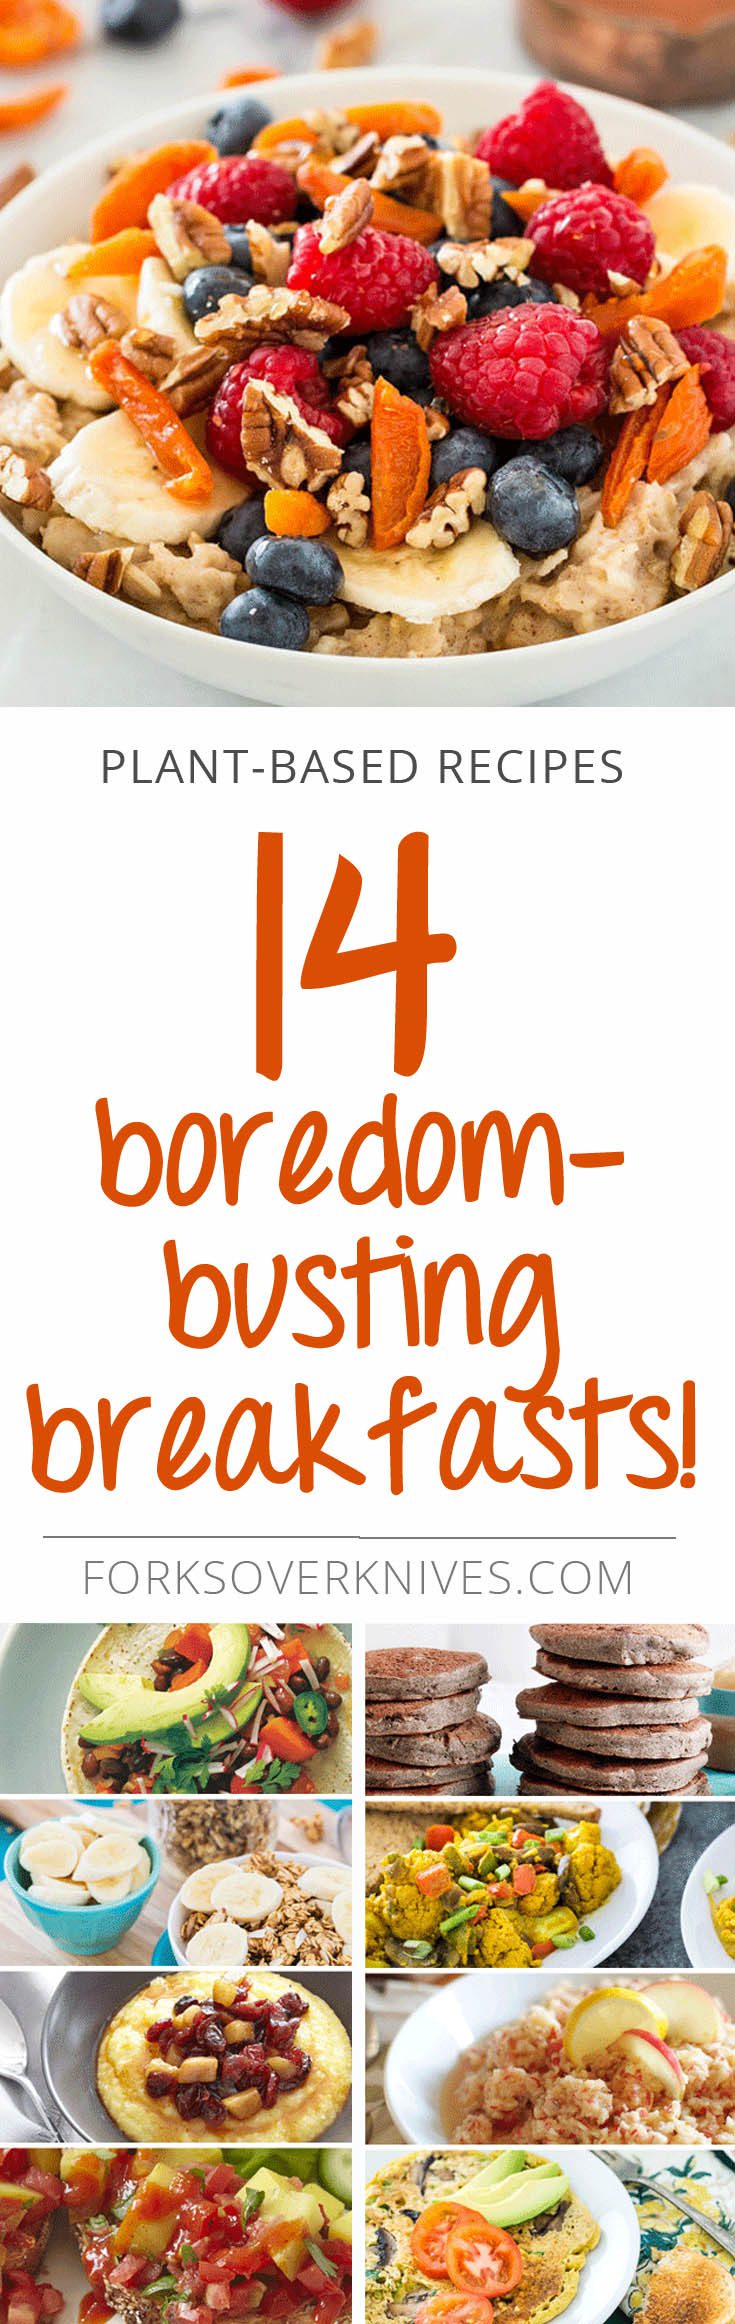 14 Boredom-Busting Plant-Based Breakfasts! That's 2 Weeks ...